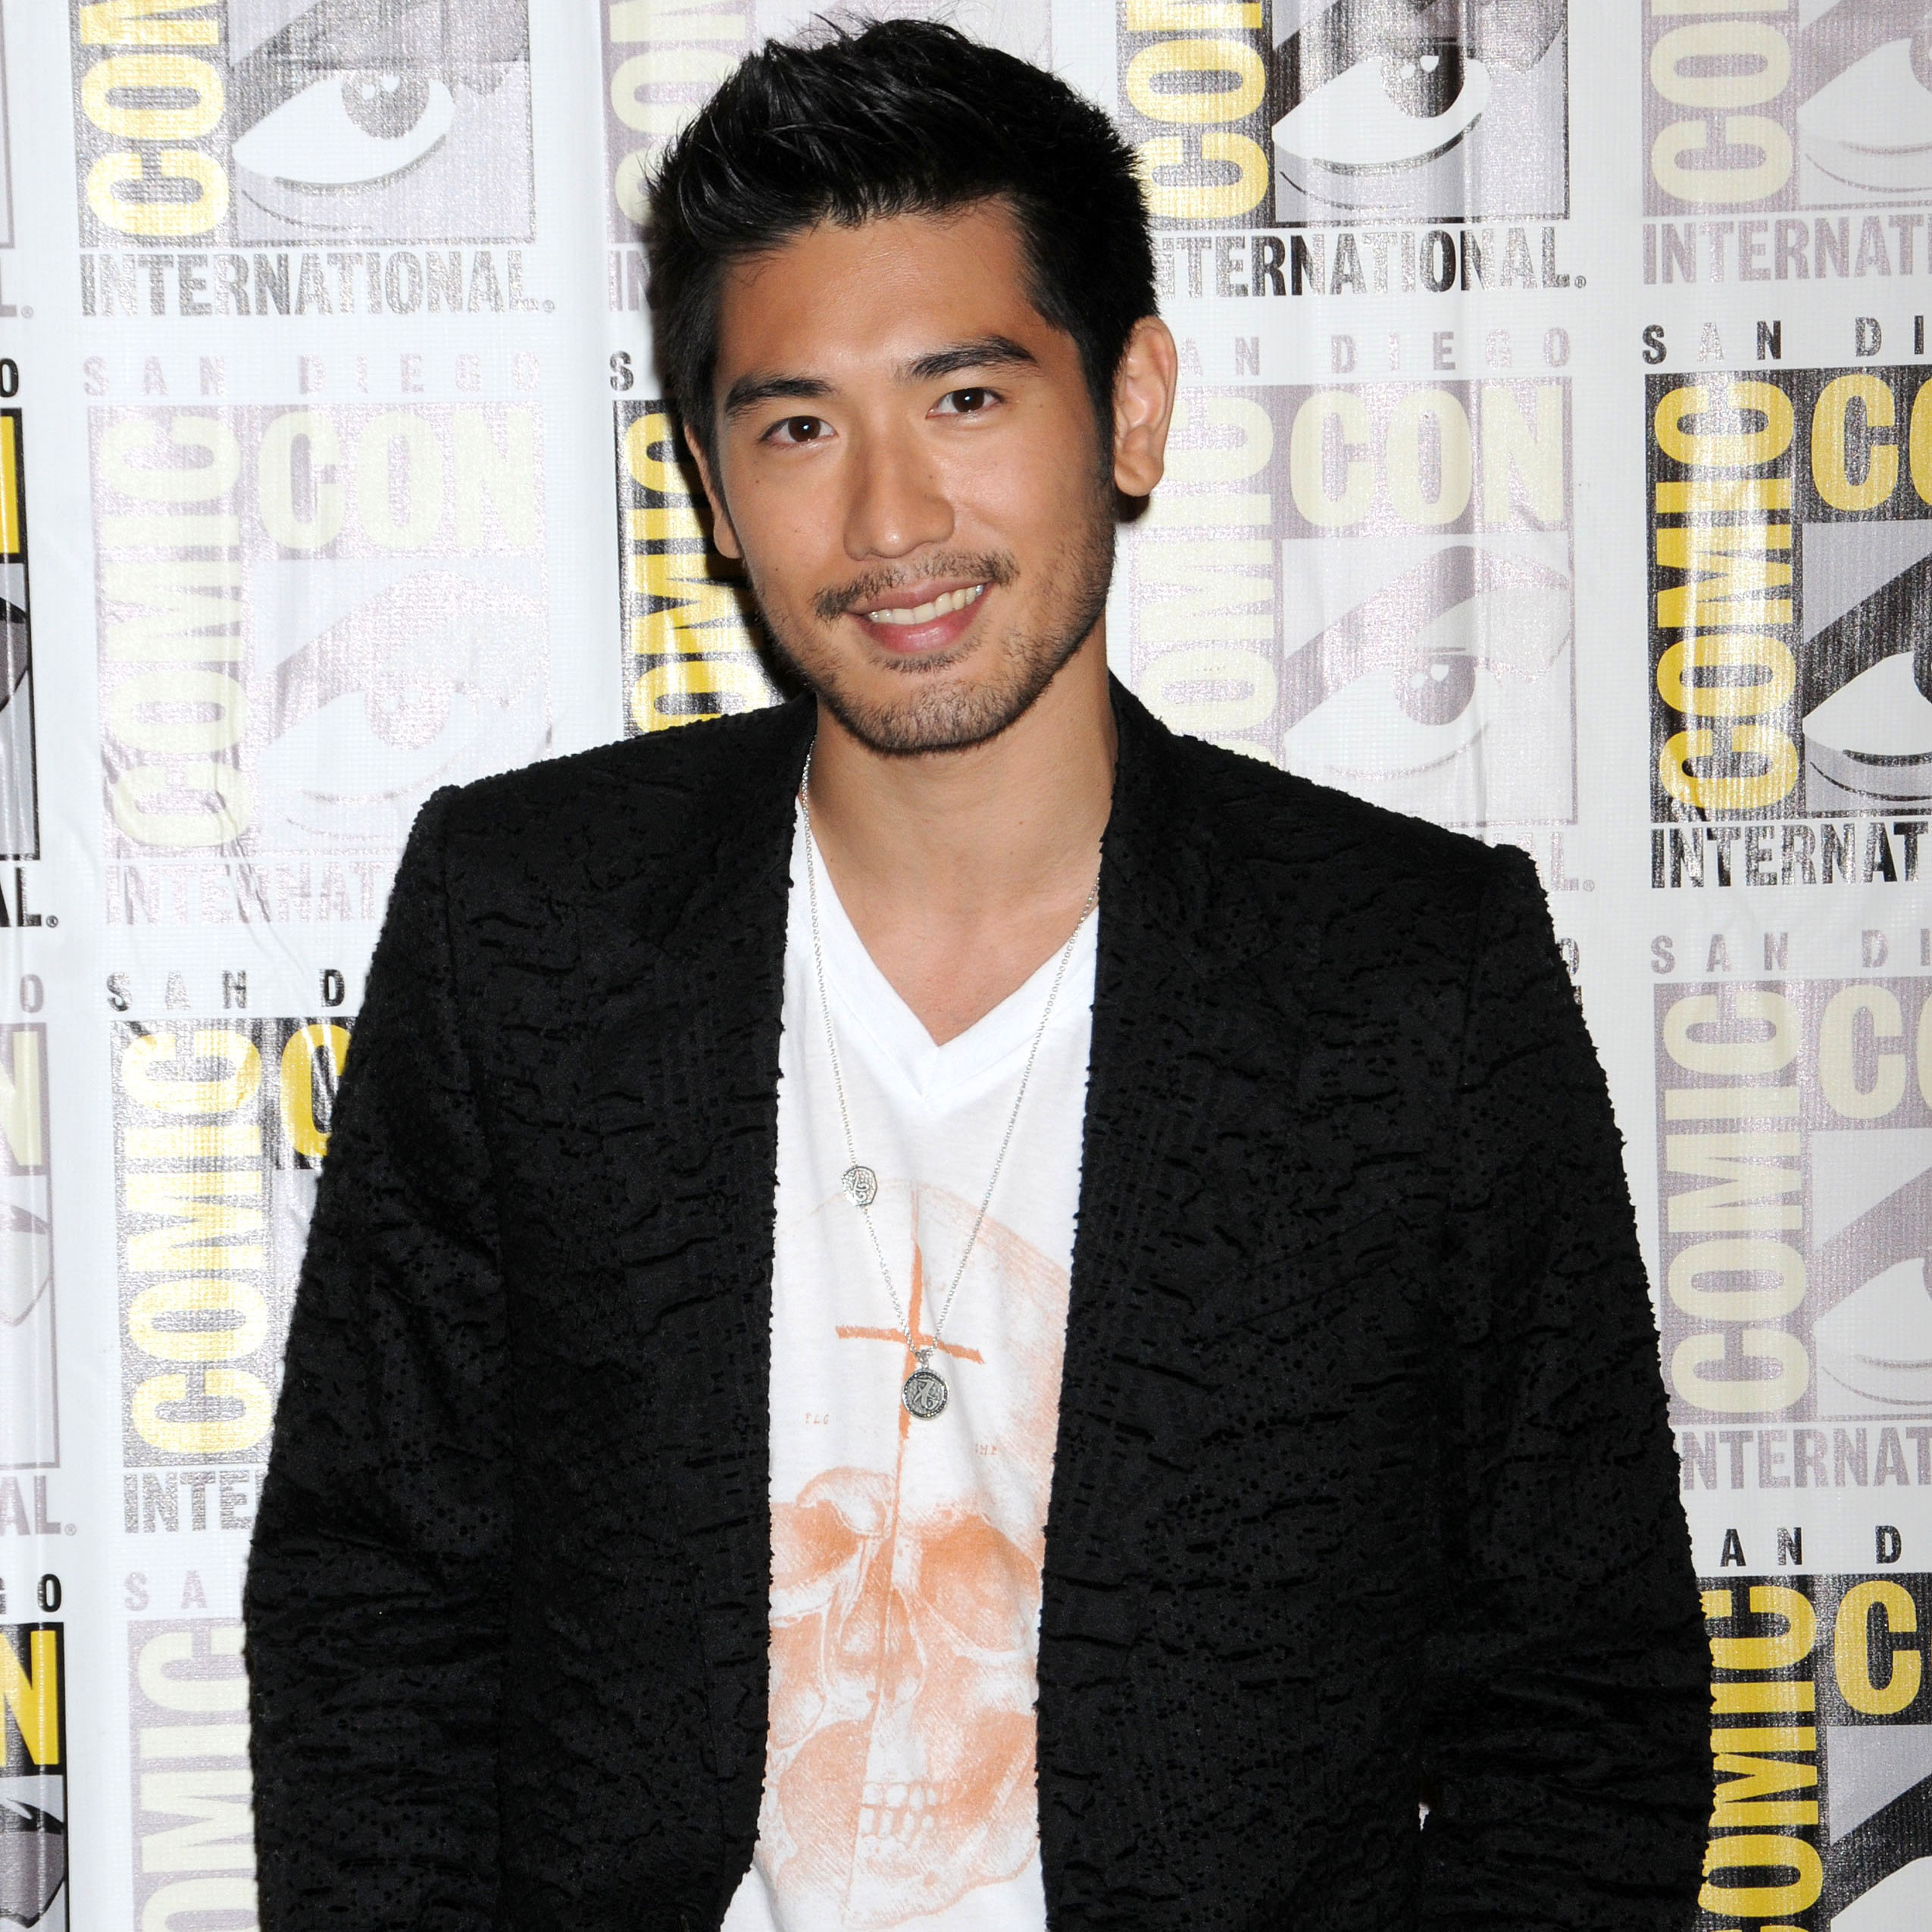 Taiwanese-Canadian model Godfrey Gao dies while filming in China